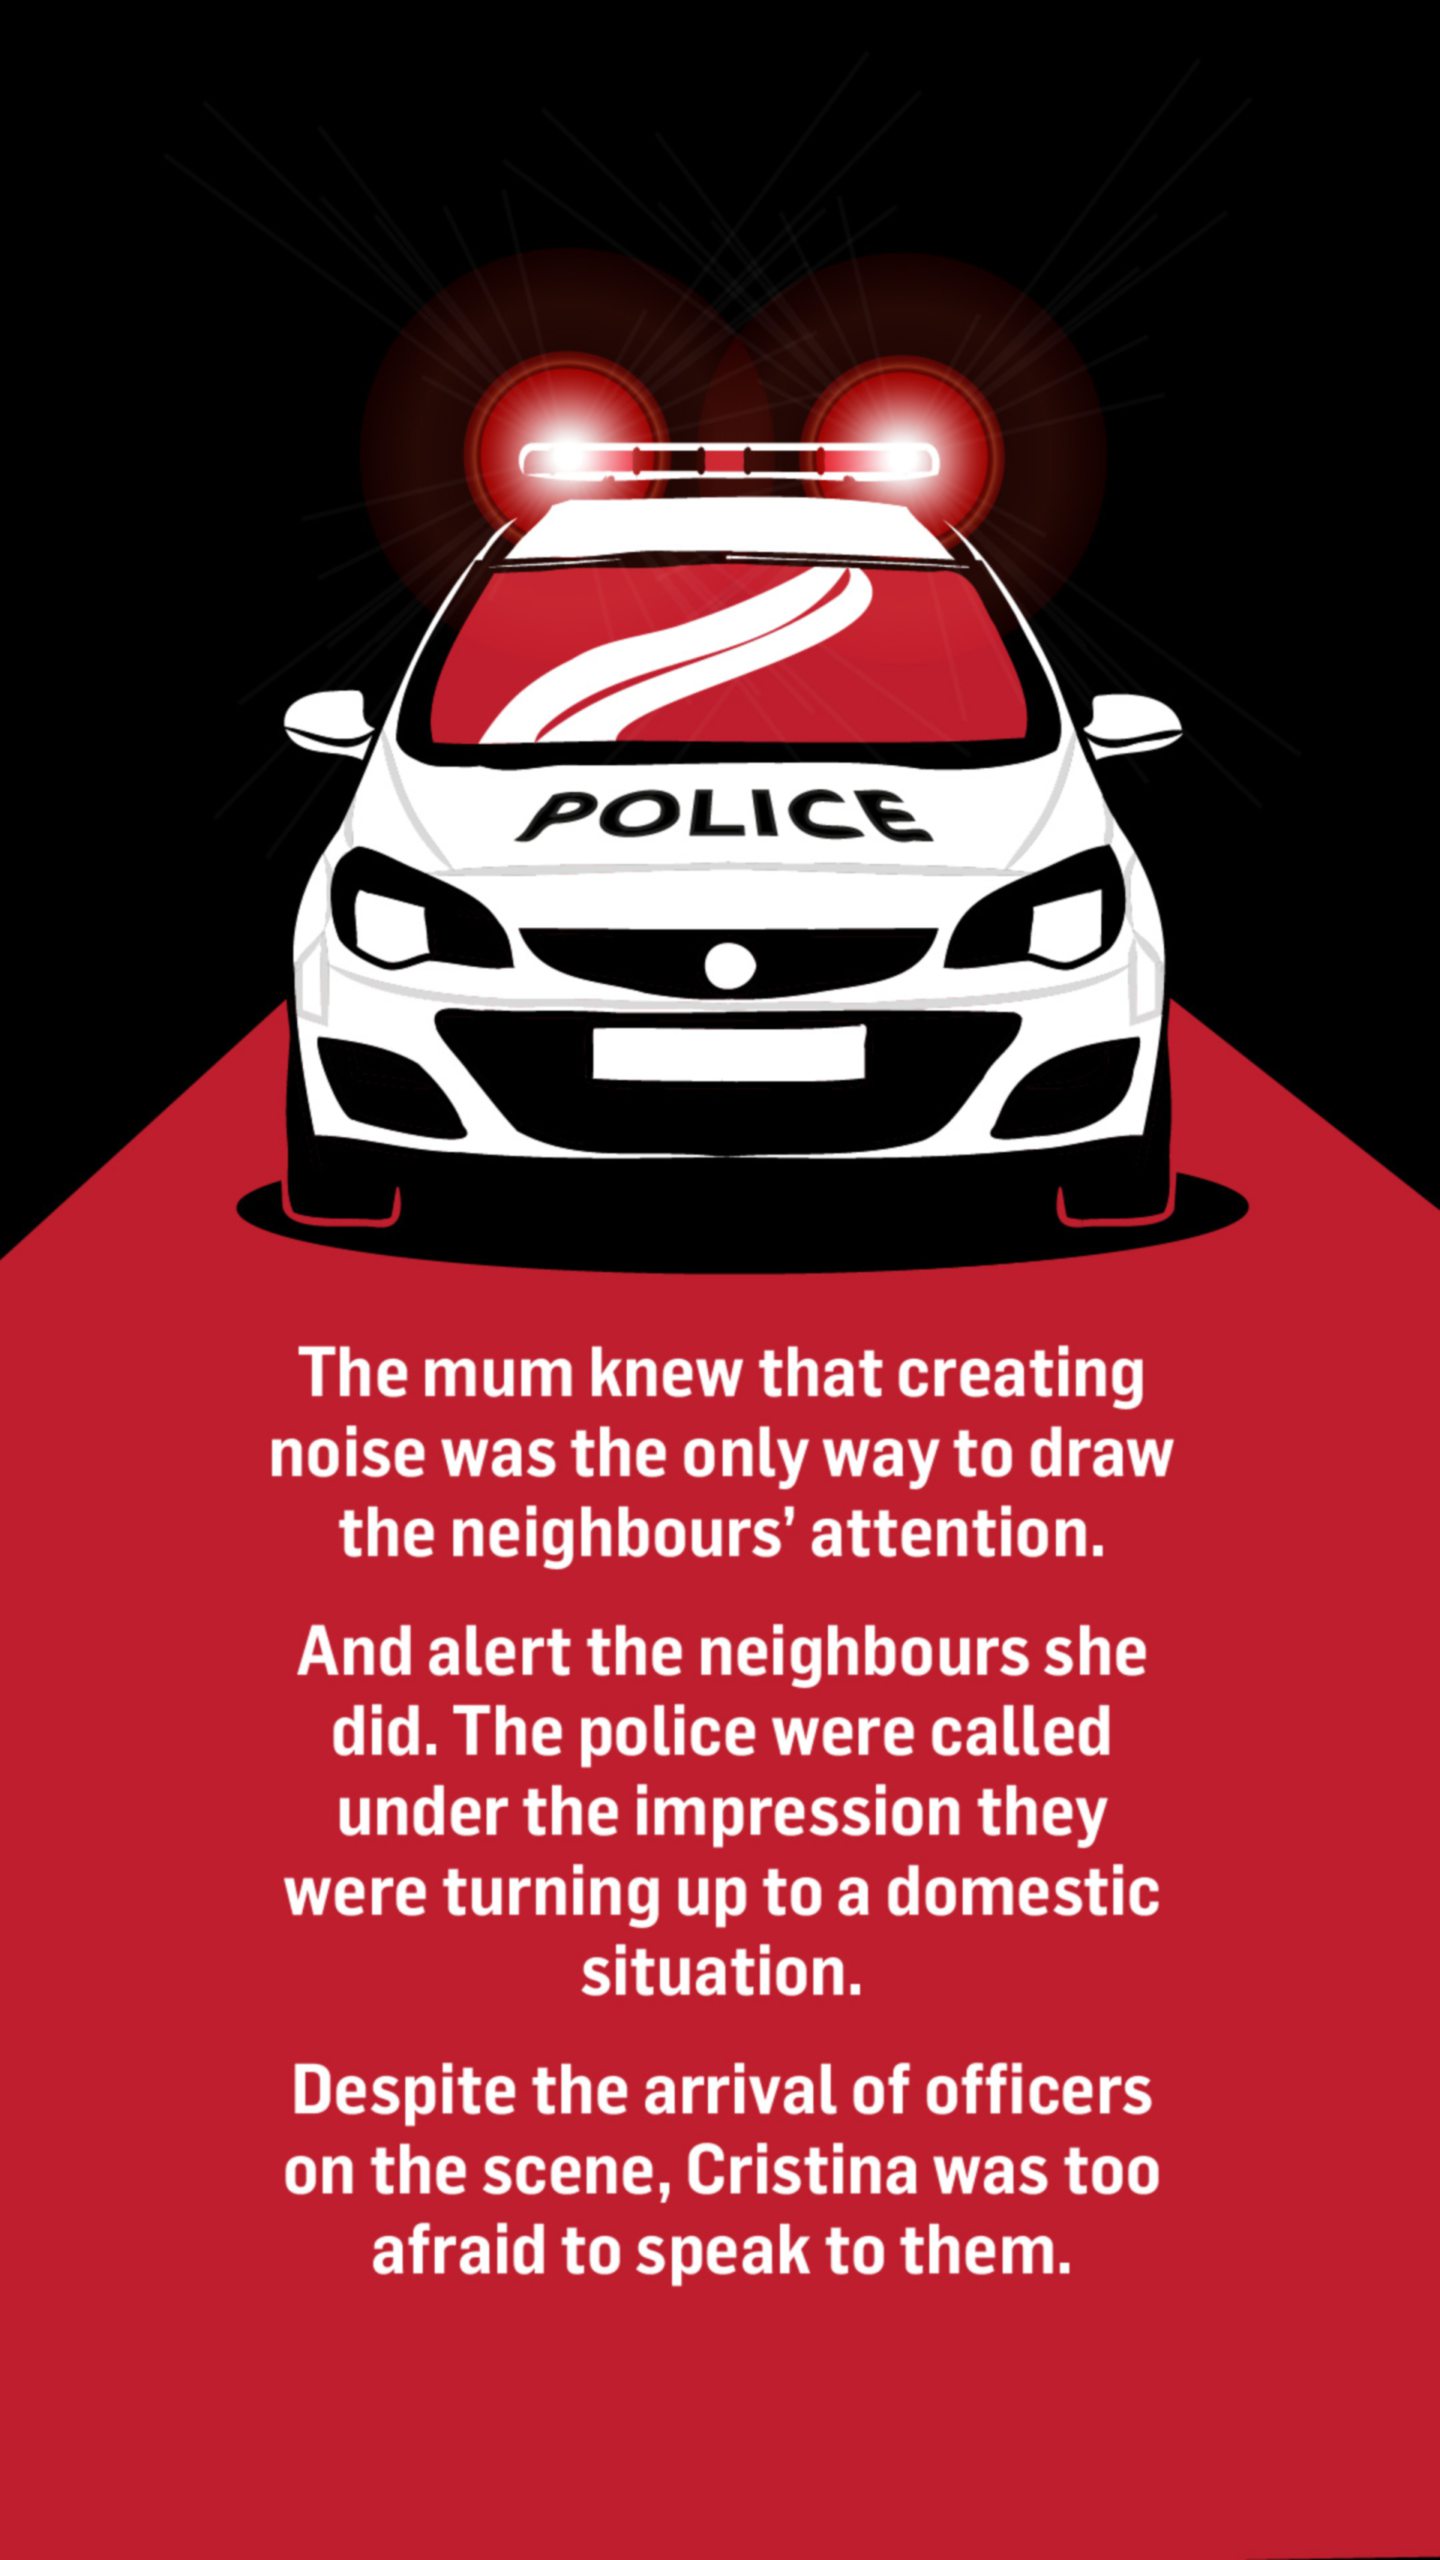 An illustration of a police car. Words below the image read: The mum knew that creating noise was the only way to draw the neighbour's attention.

And alert the neighbours she did. The police were called under the impression they were turning up to a domestic situation.

Despite the arrival of officers on the scene, Cristina was too afraid to speak to them.